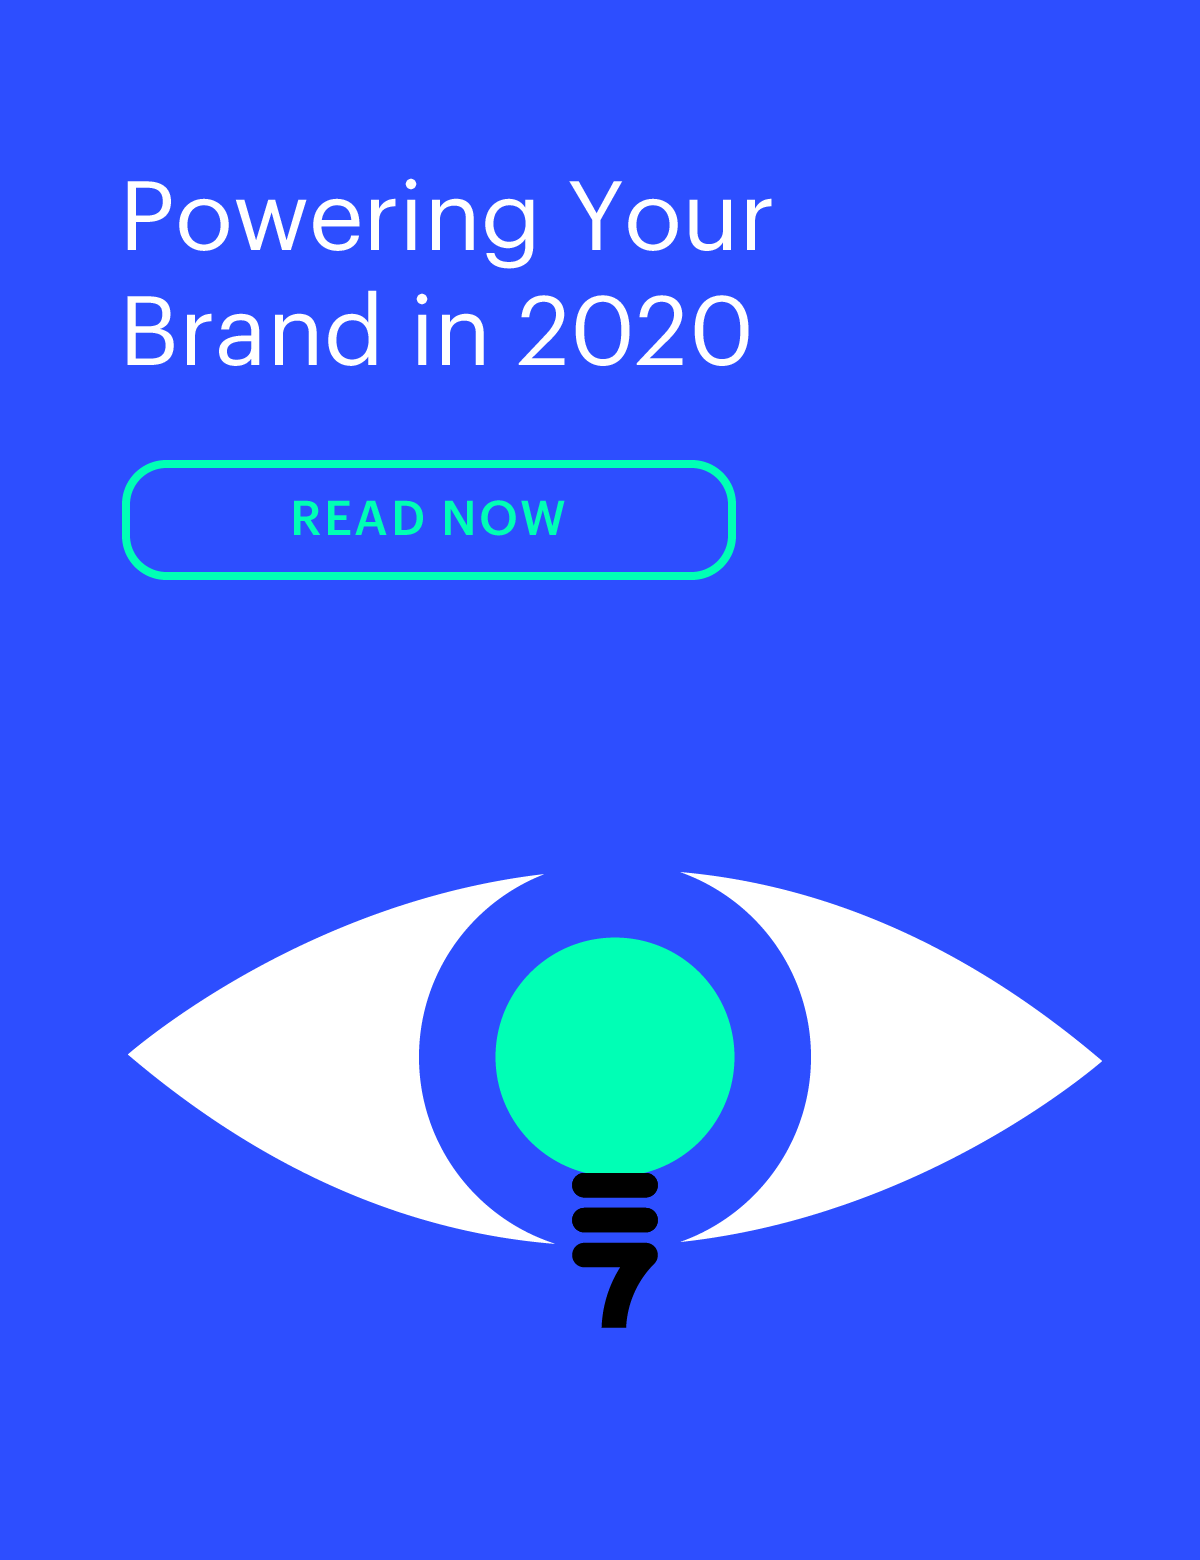 Powering Your Brand in 2020 